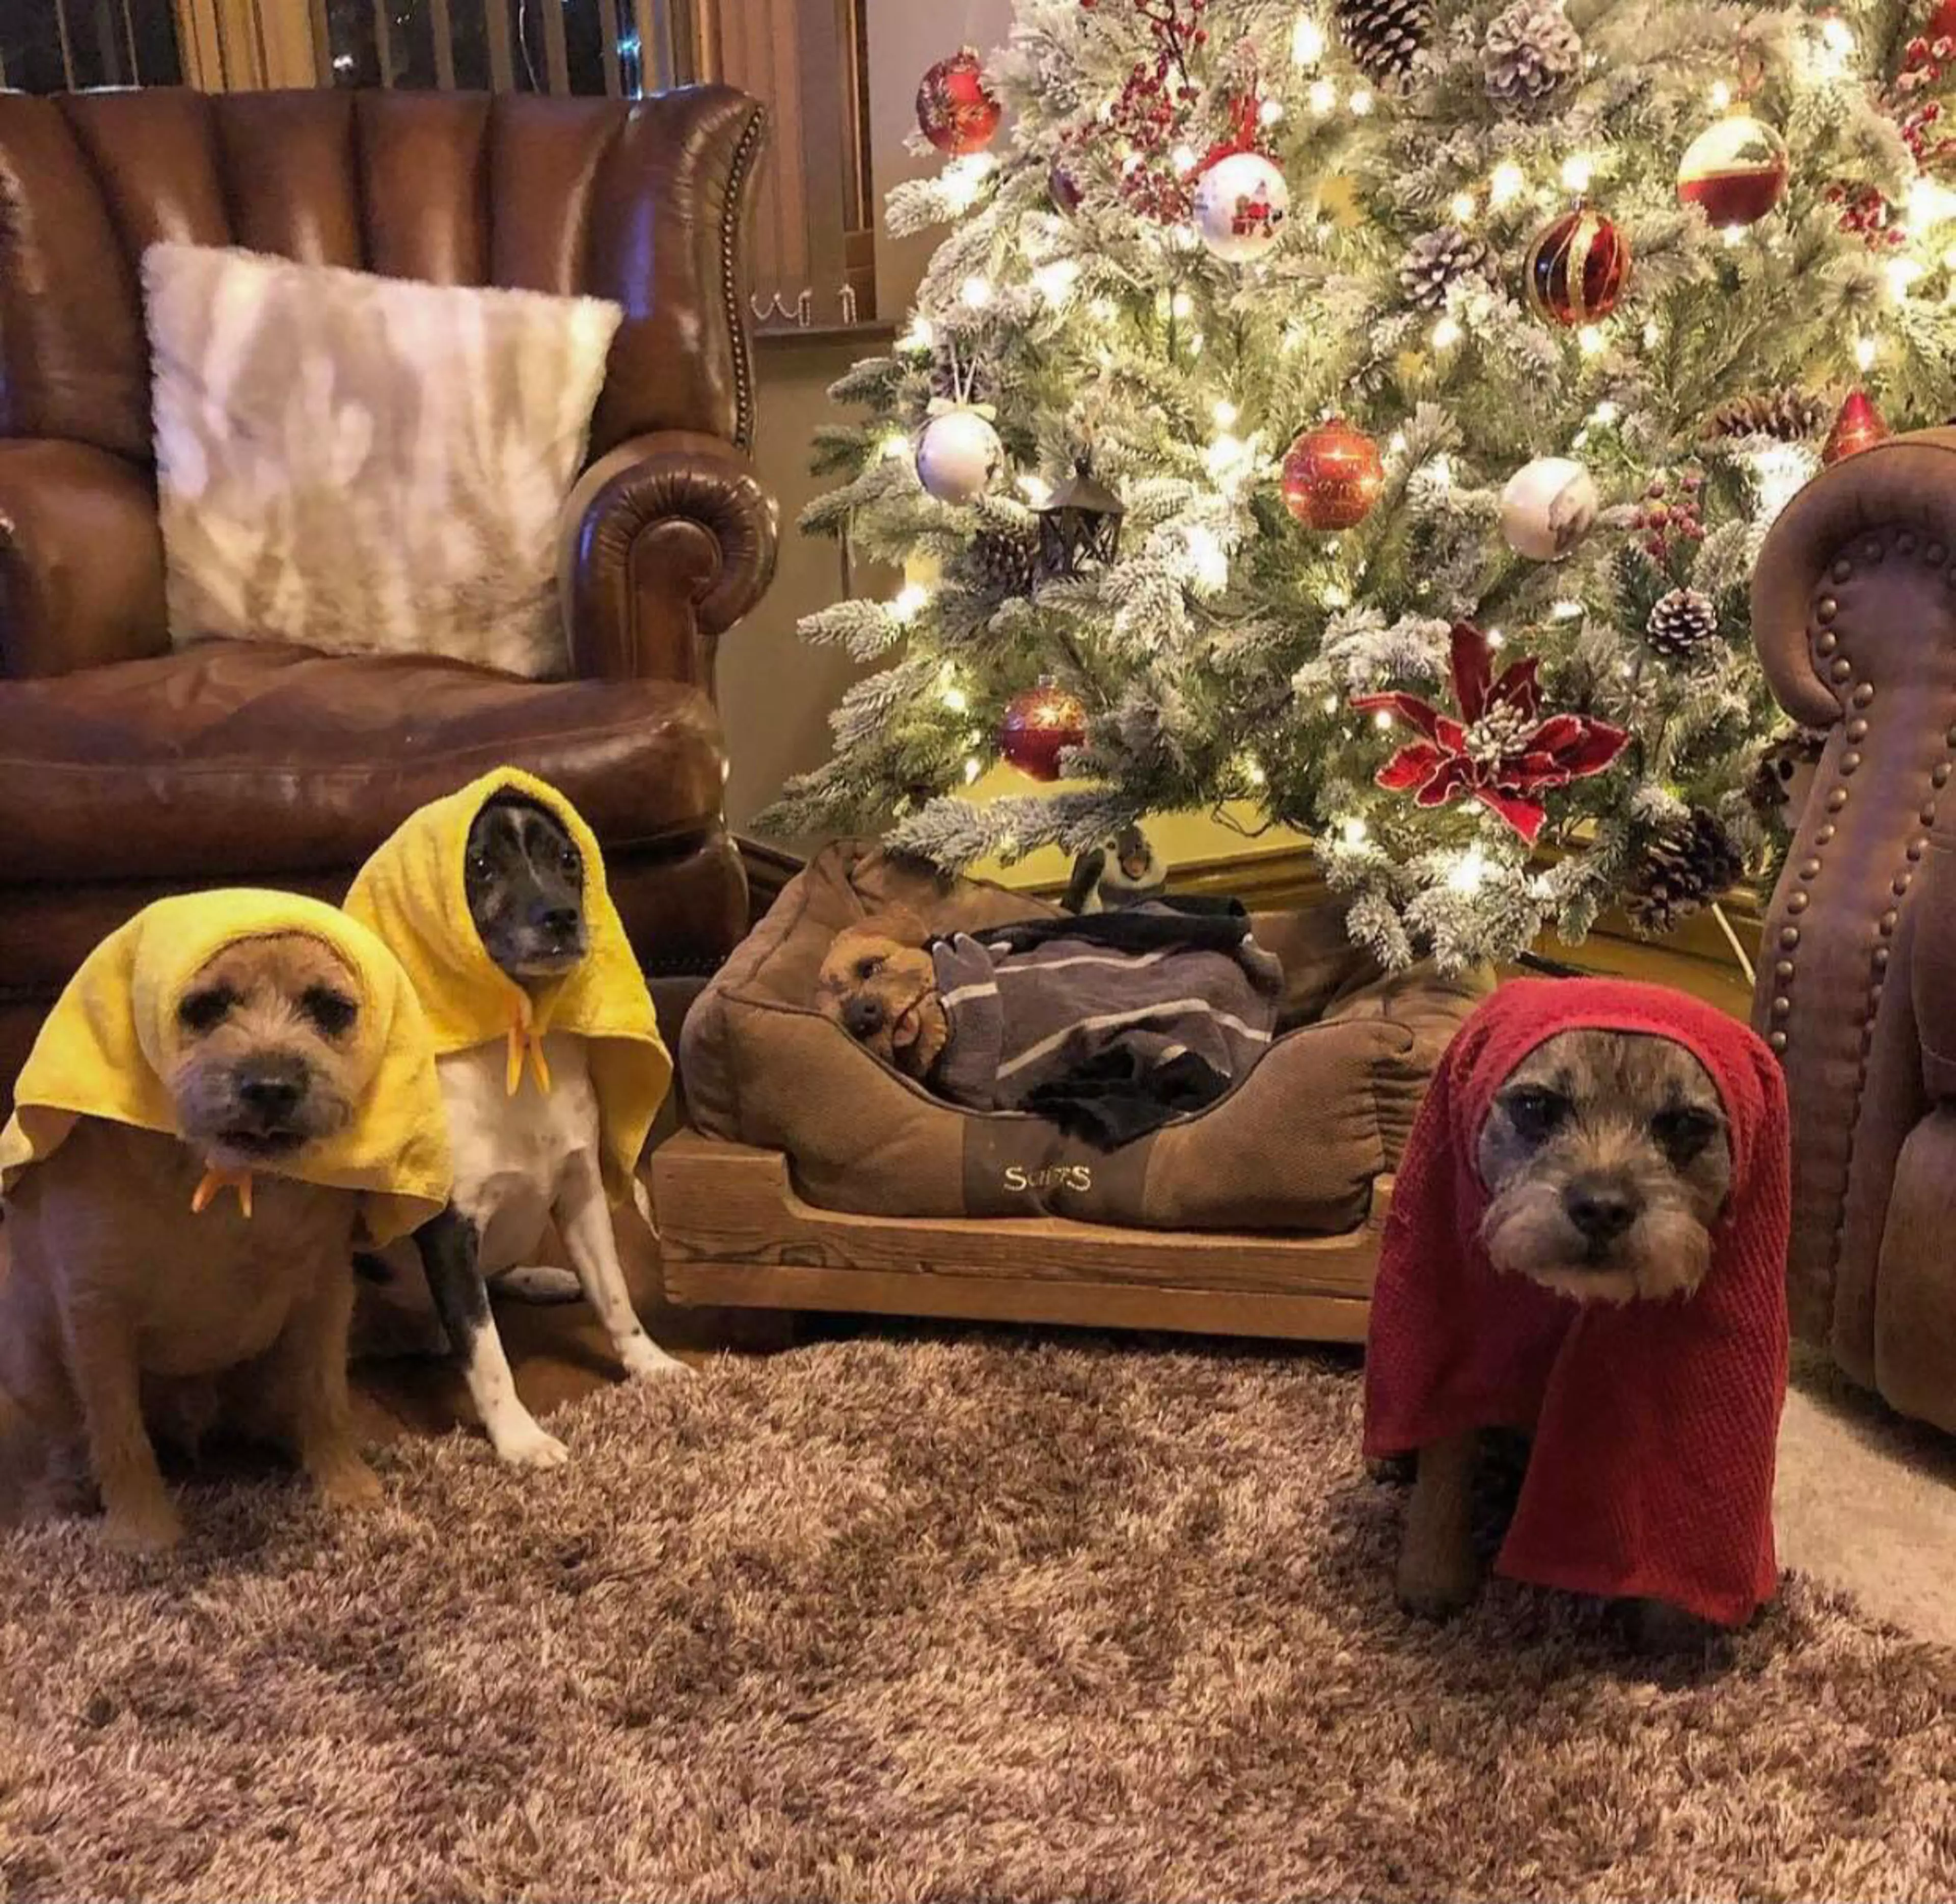 Three pooches have created a hilarious nativity scene - and they look so cute (